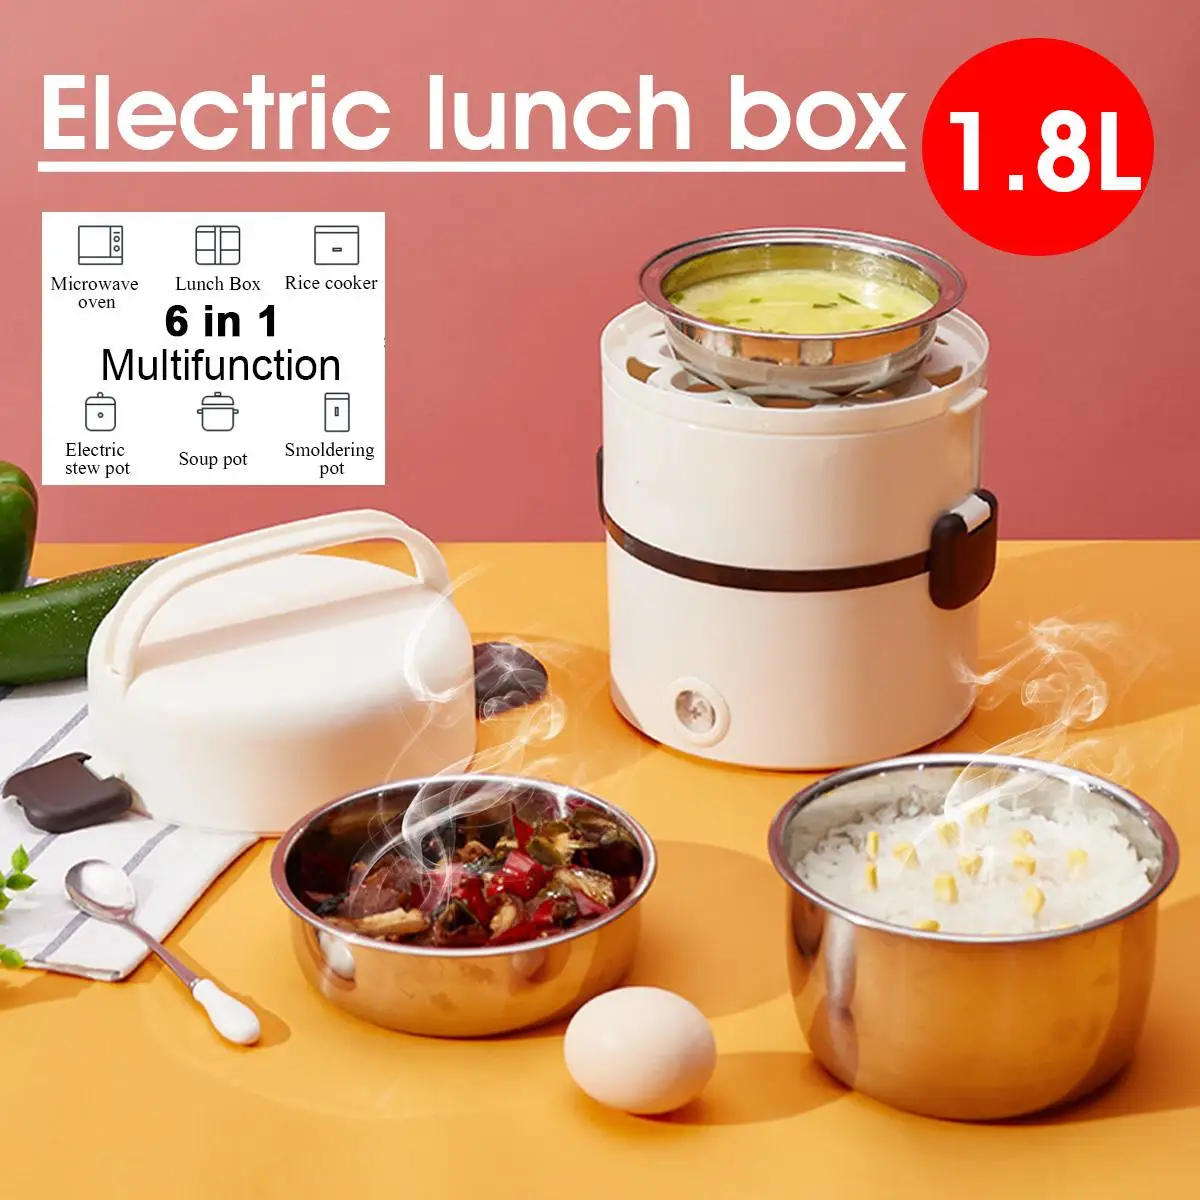 250W 1.8L Stainless Steel 3 Layers Electric Rice Cooker Steamer Portable Meal Thermal Heating Lunch Box Food Container Warmer stainless steel hot dog sandwich bread display cabinet food warmer counter steamer equipment tool